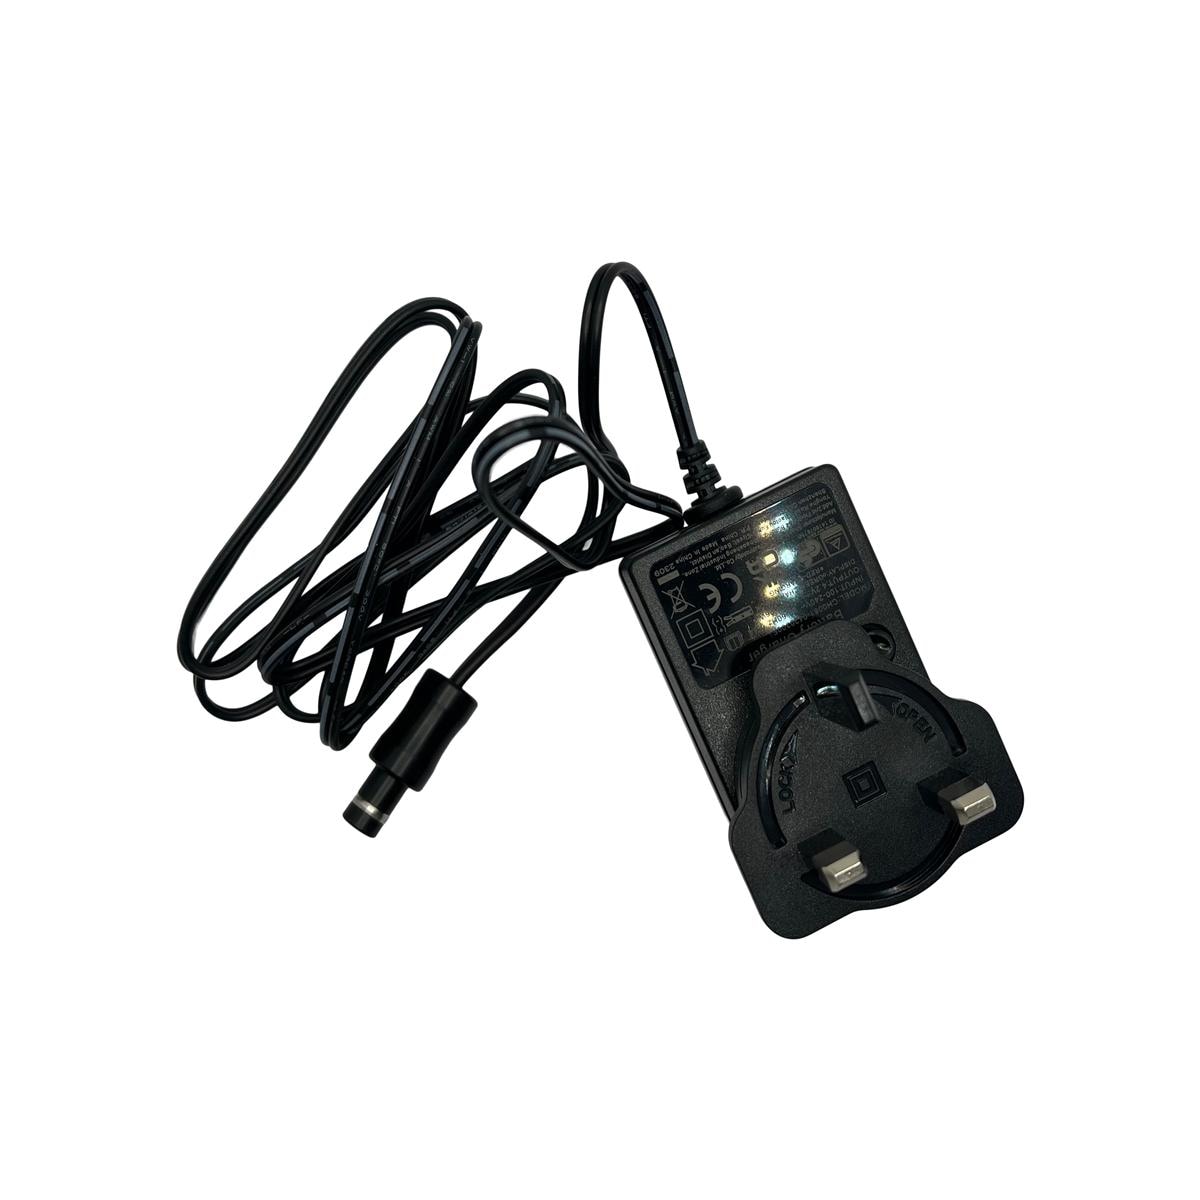 D-Light Duo Charger/Power Supply